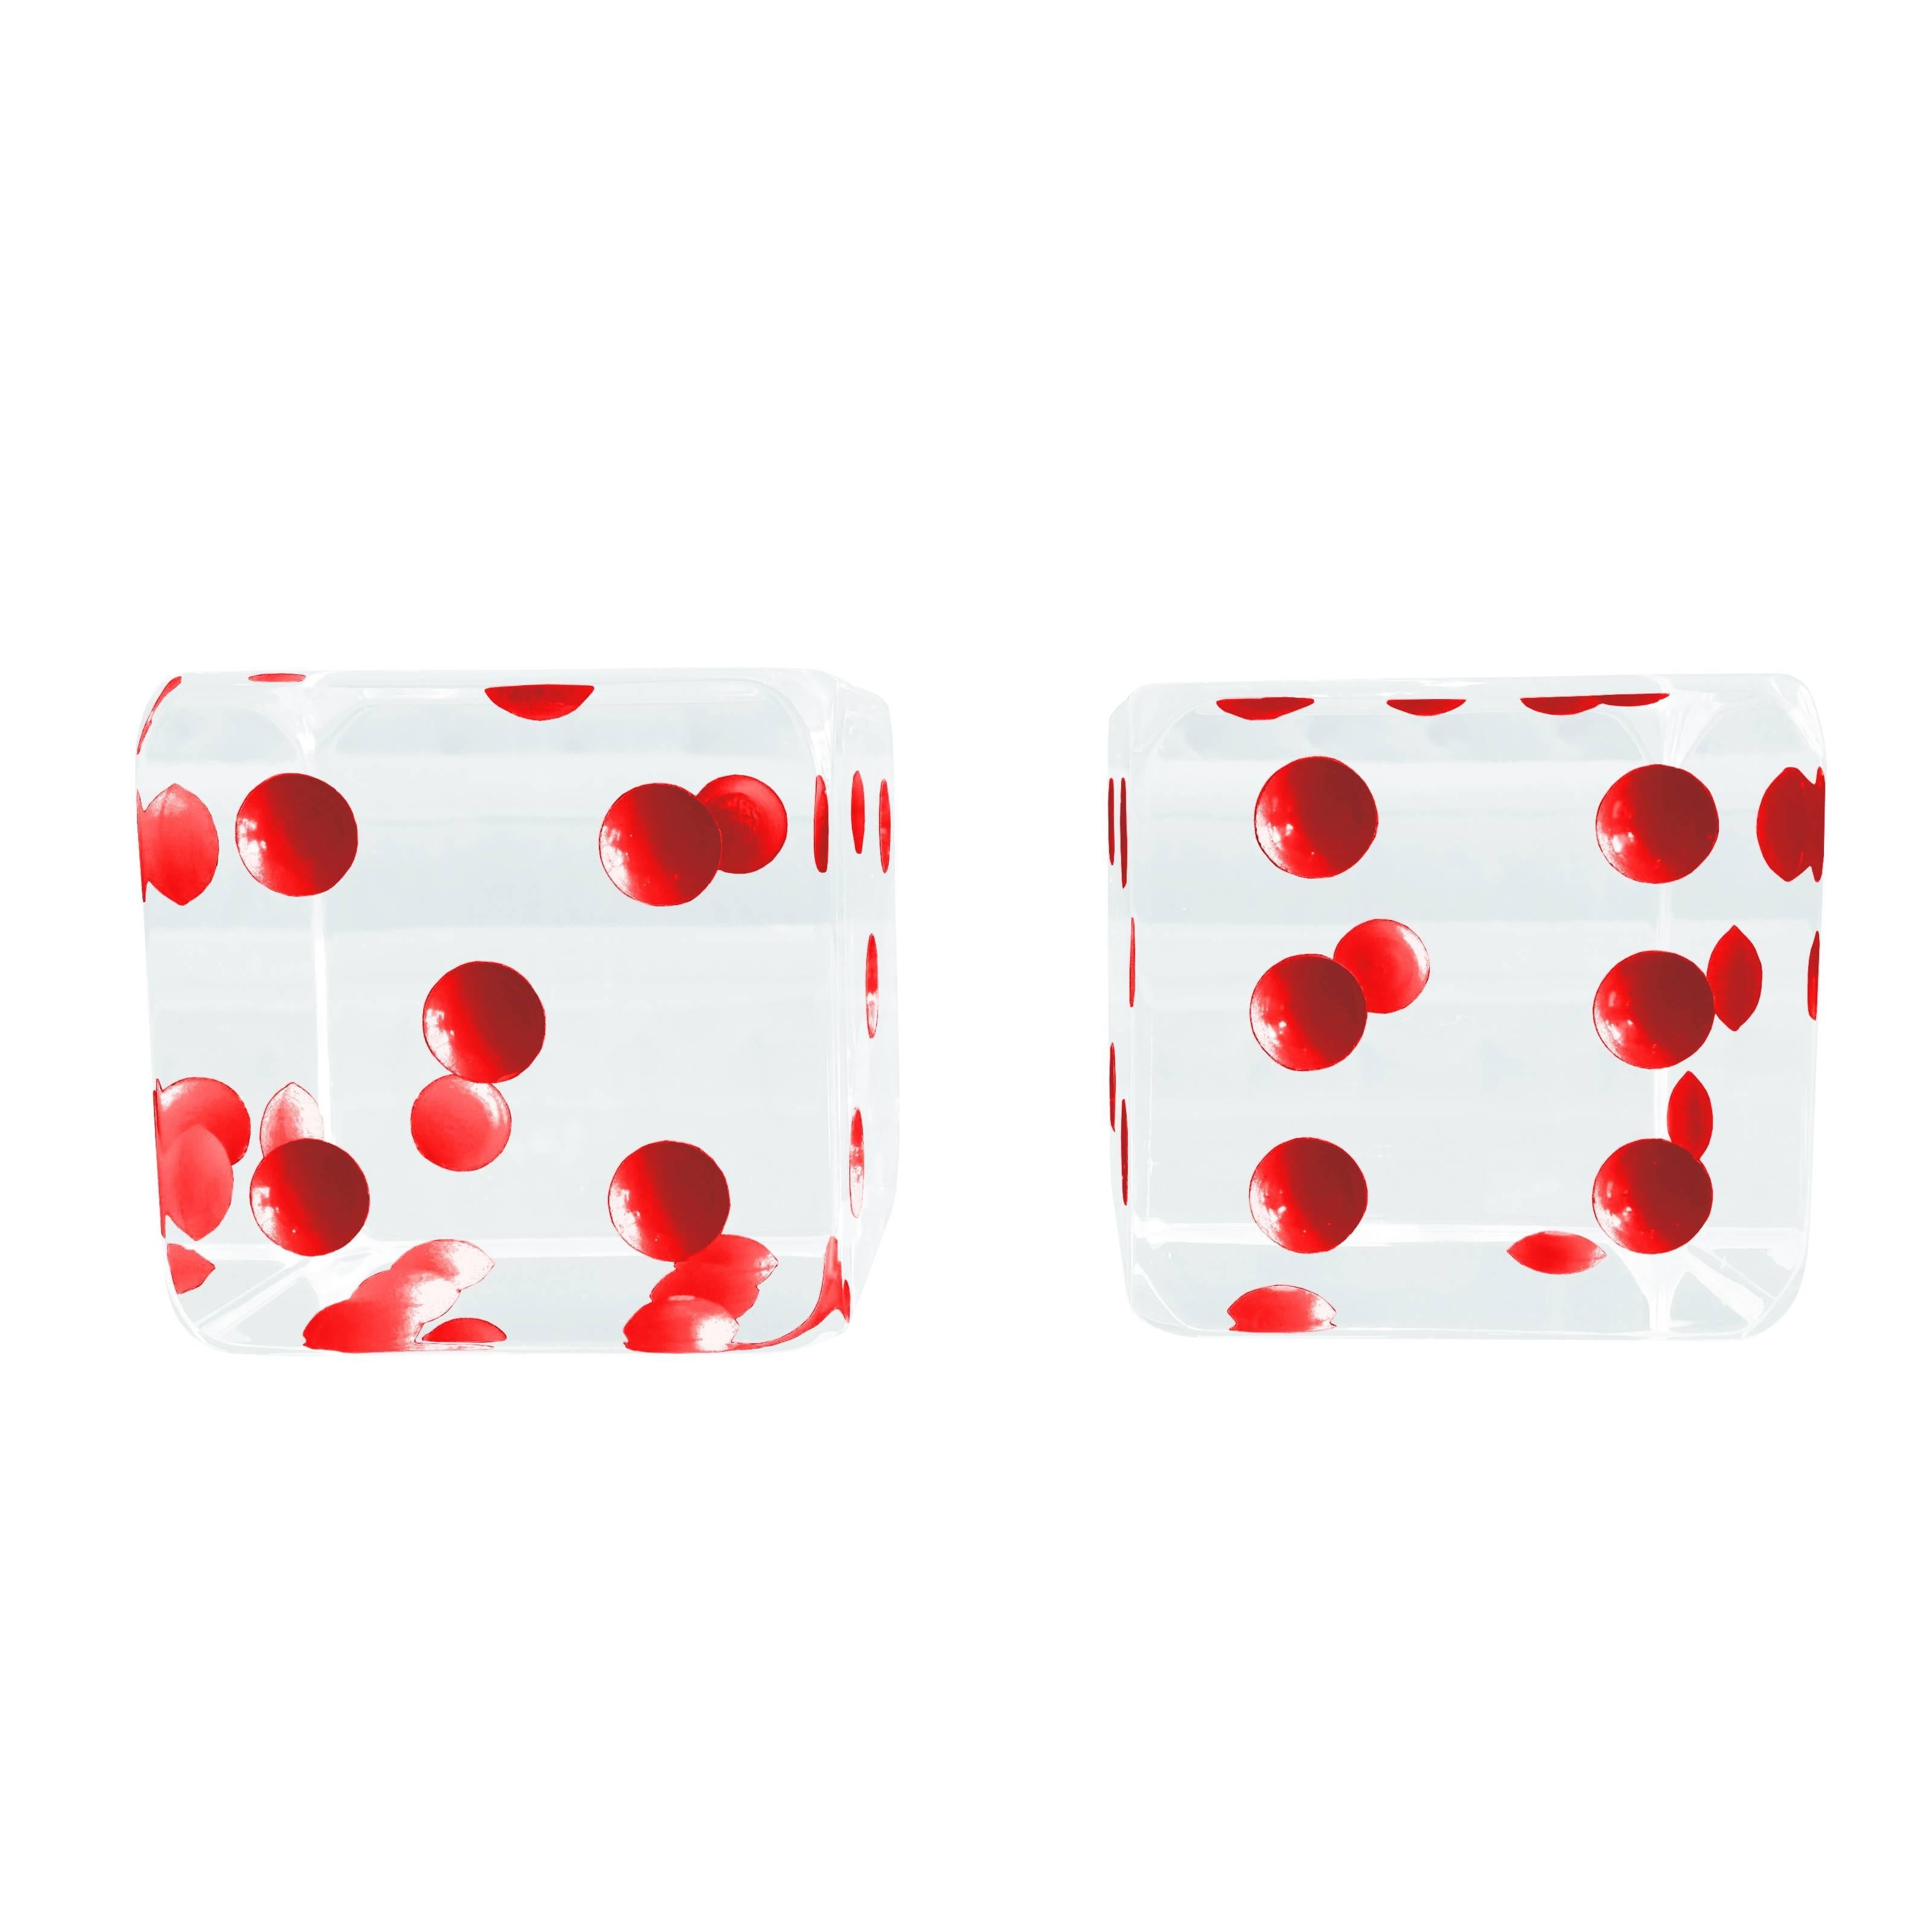 Oversized Dice Sculpture with Red Dots by Charles Hollis Jones